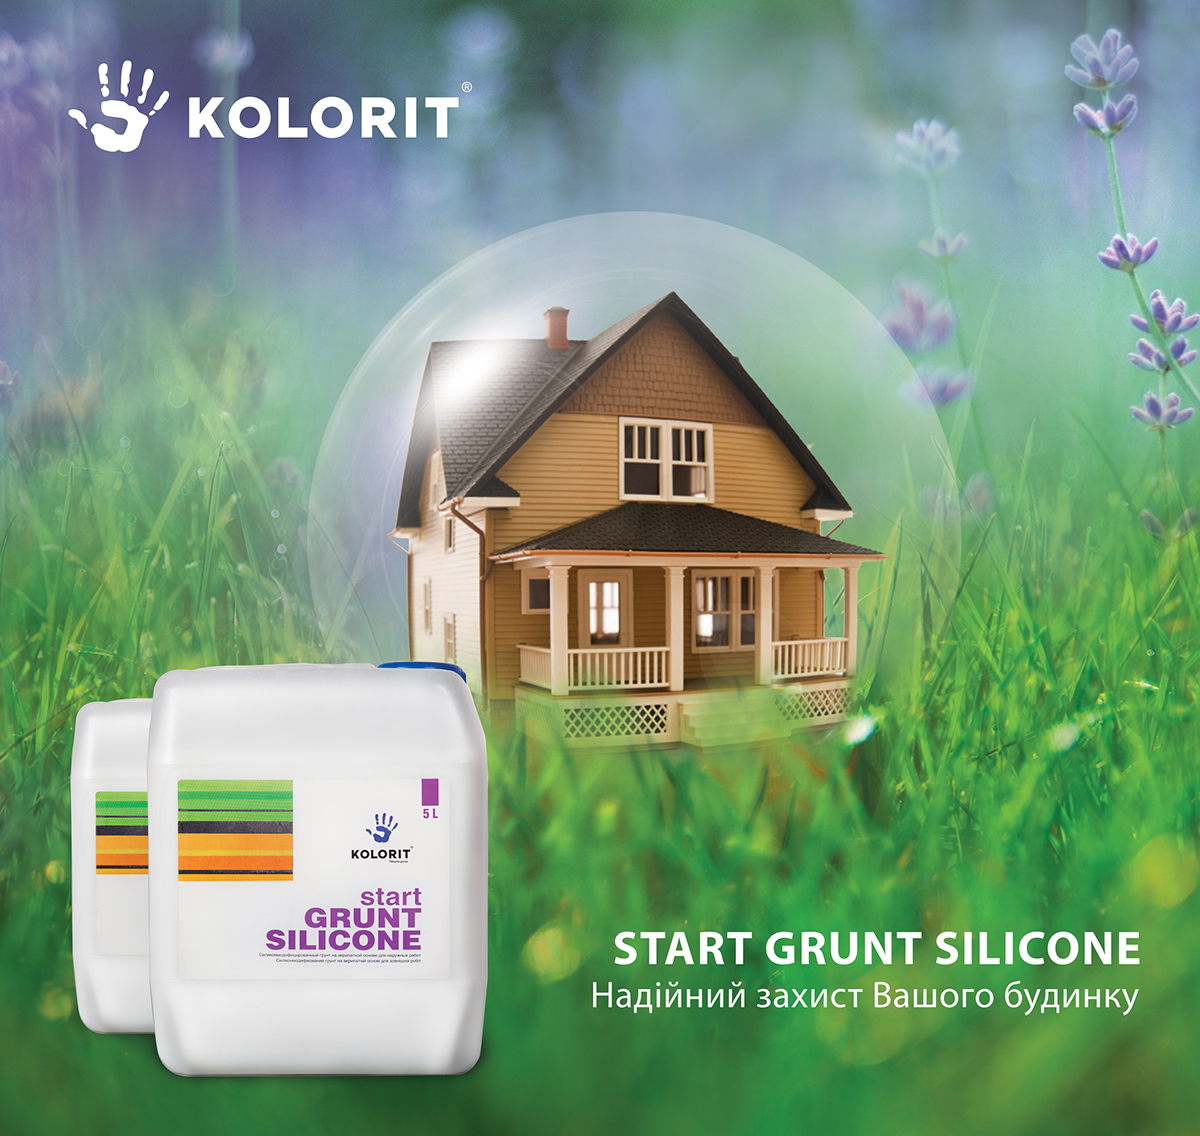 ad primer grunt kolorit silicone Creative Ad paint house protective power advertisemant media lavender protection paint company eco